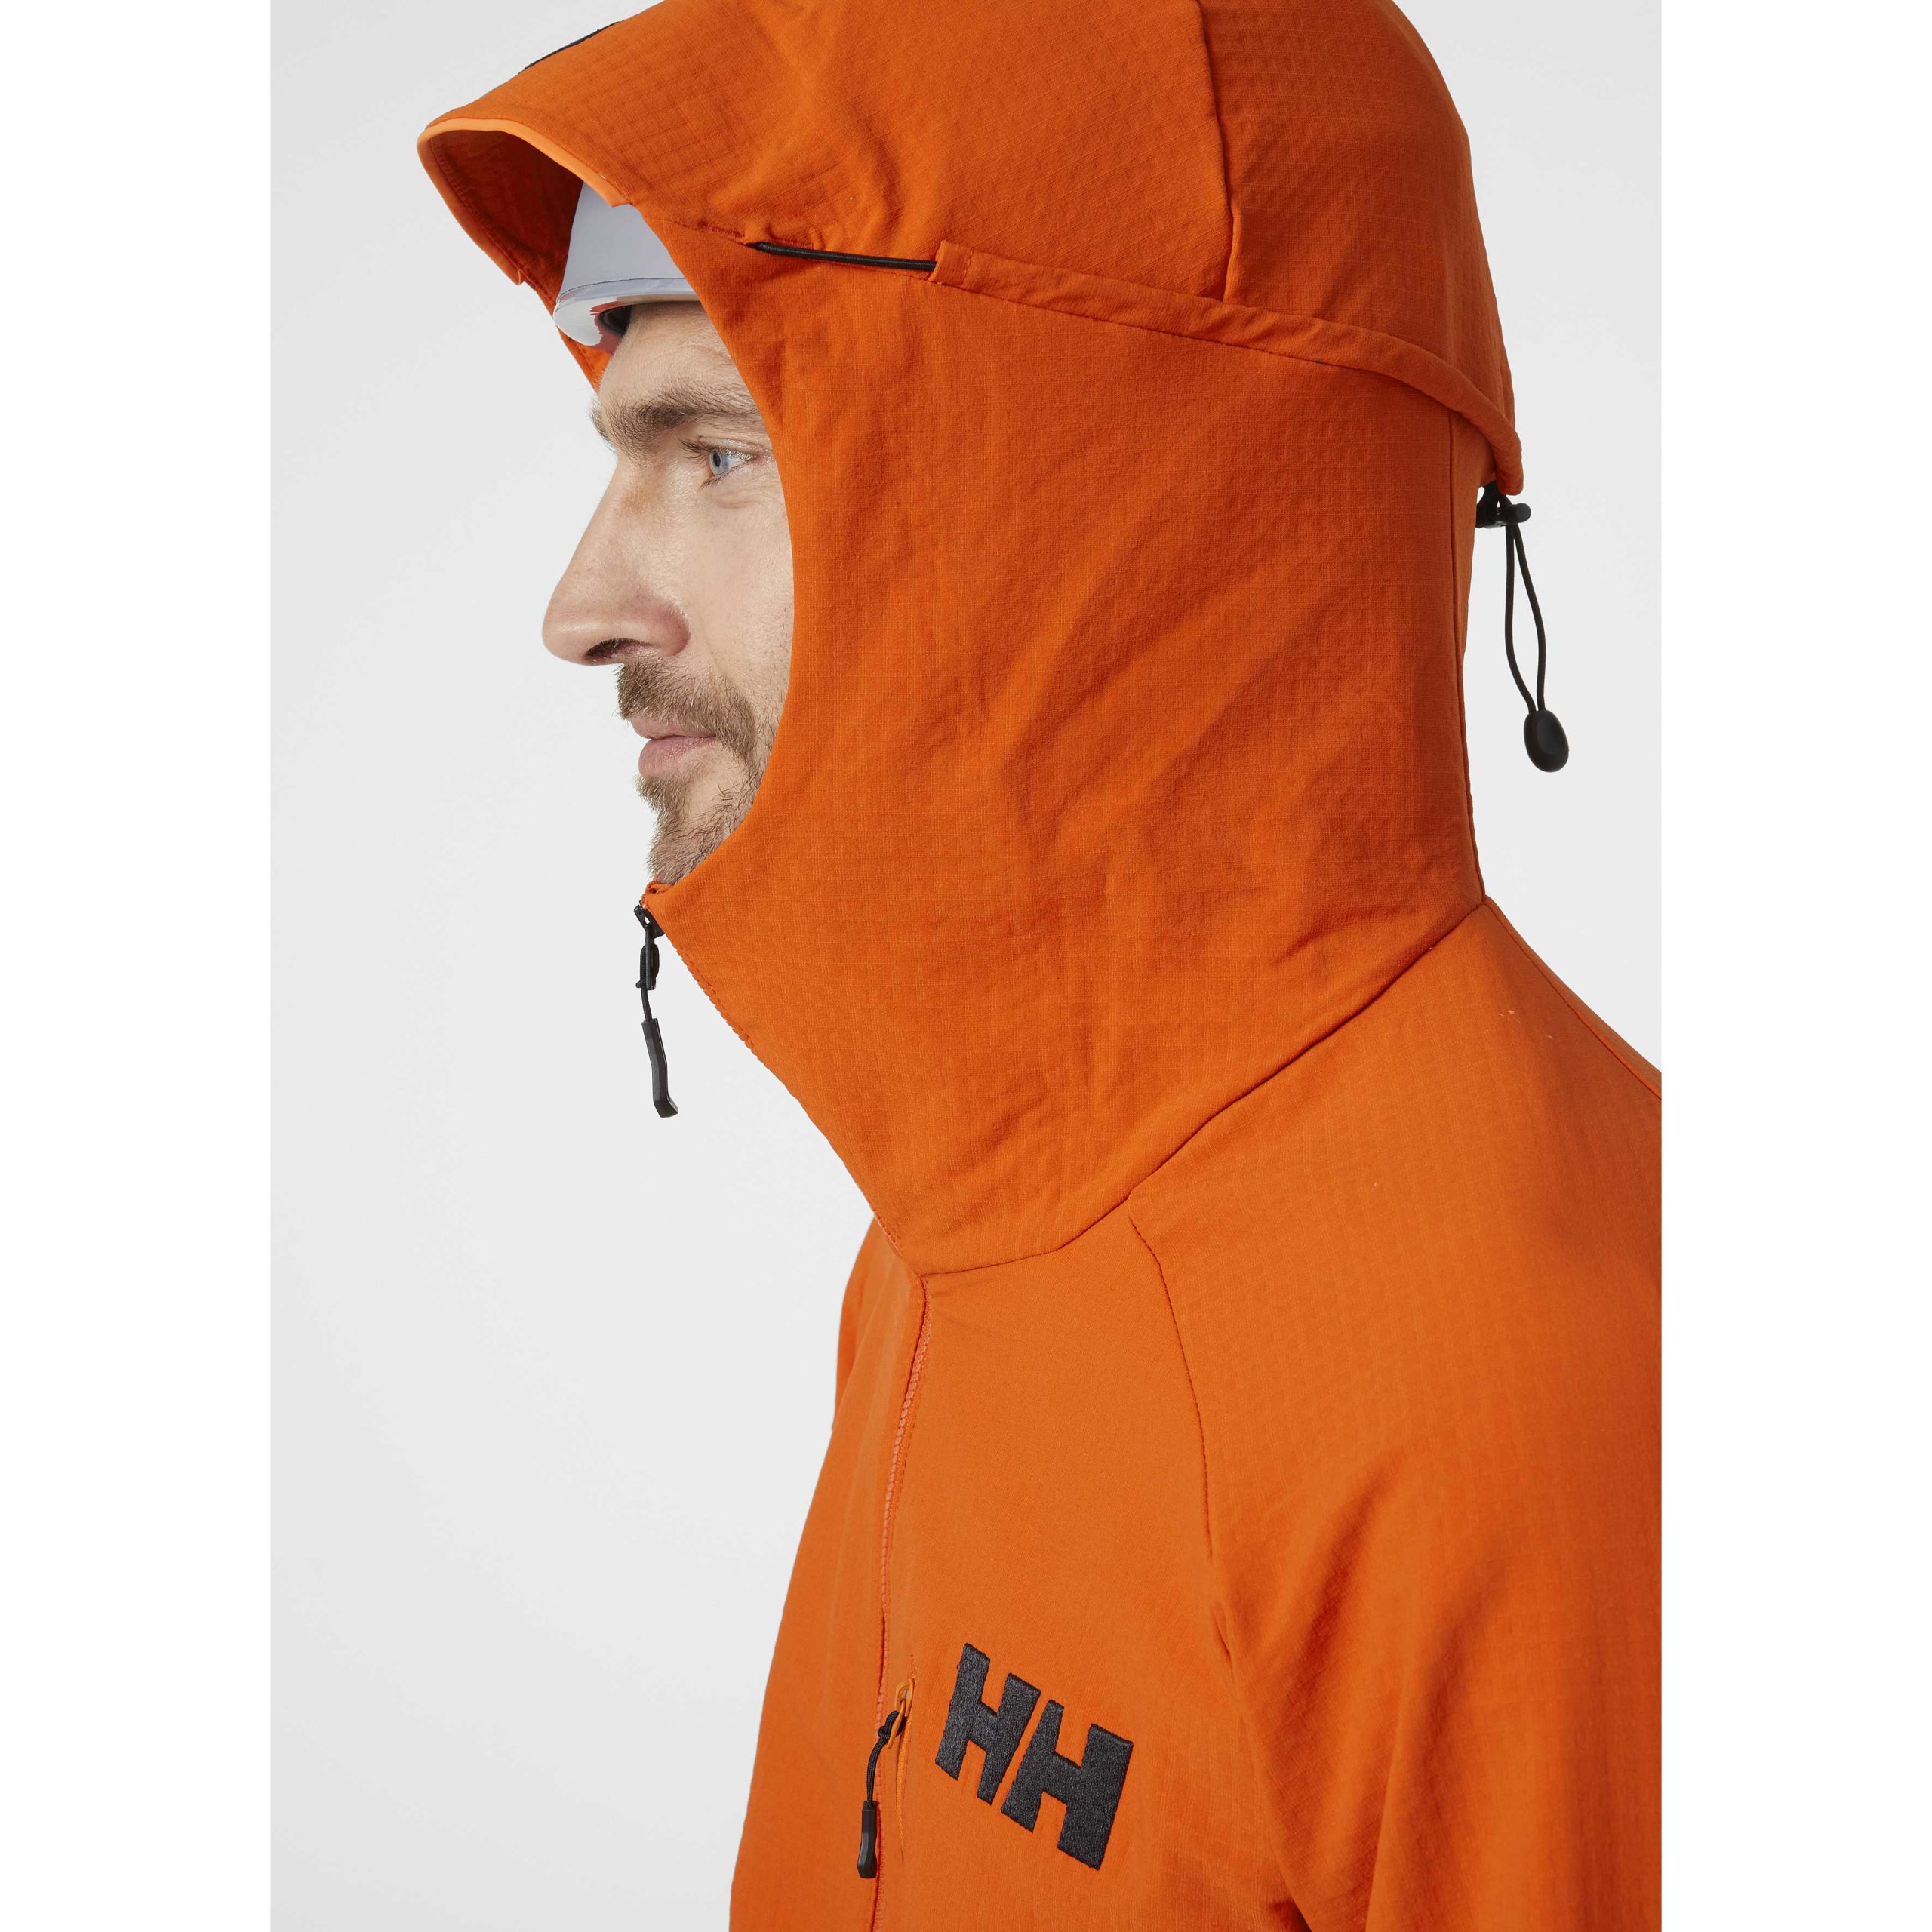 The Odin Pro Shield, A Jacket From Helly Hansen 